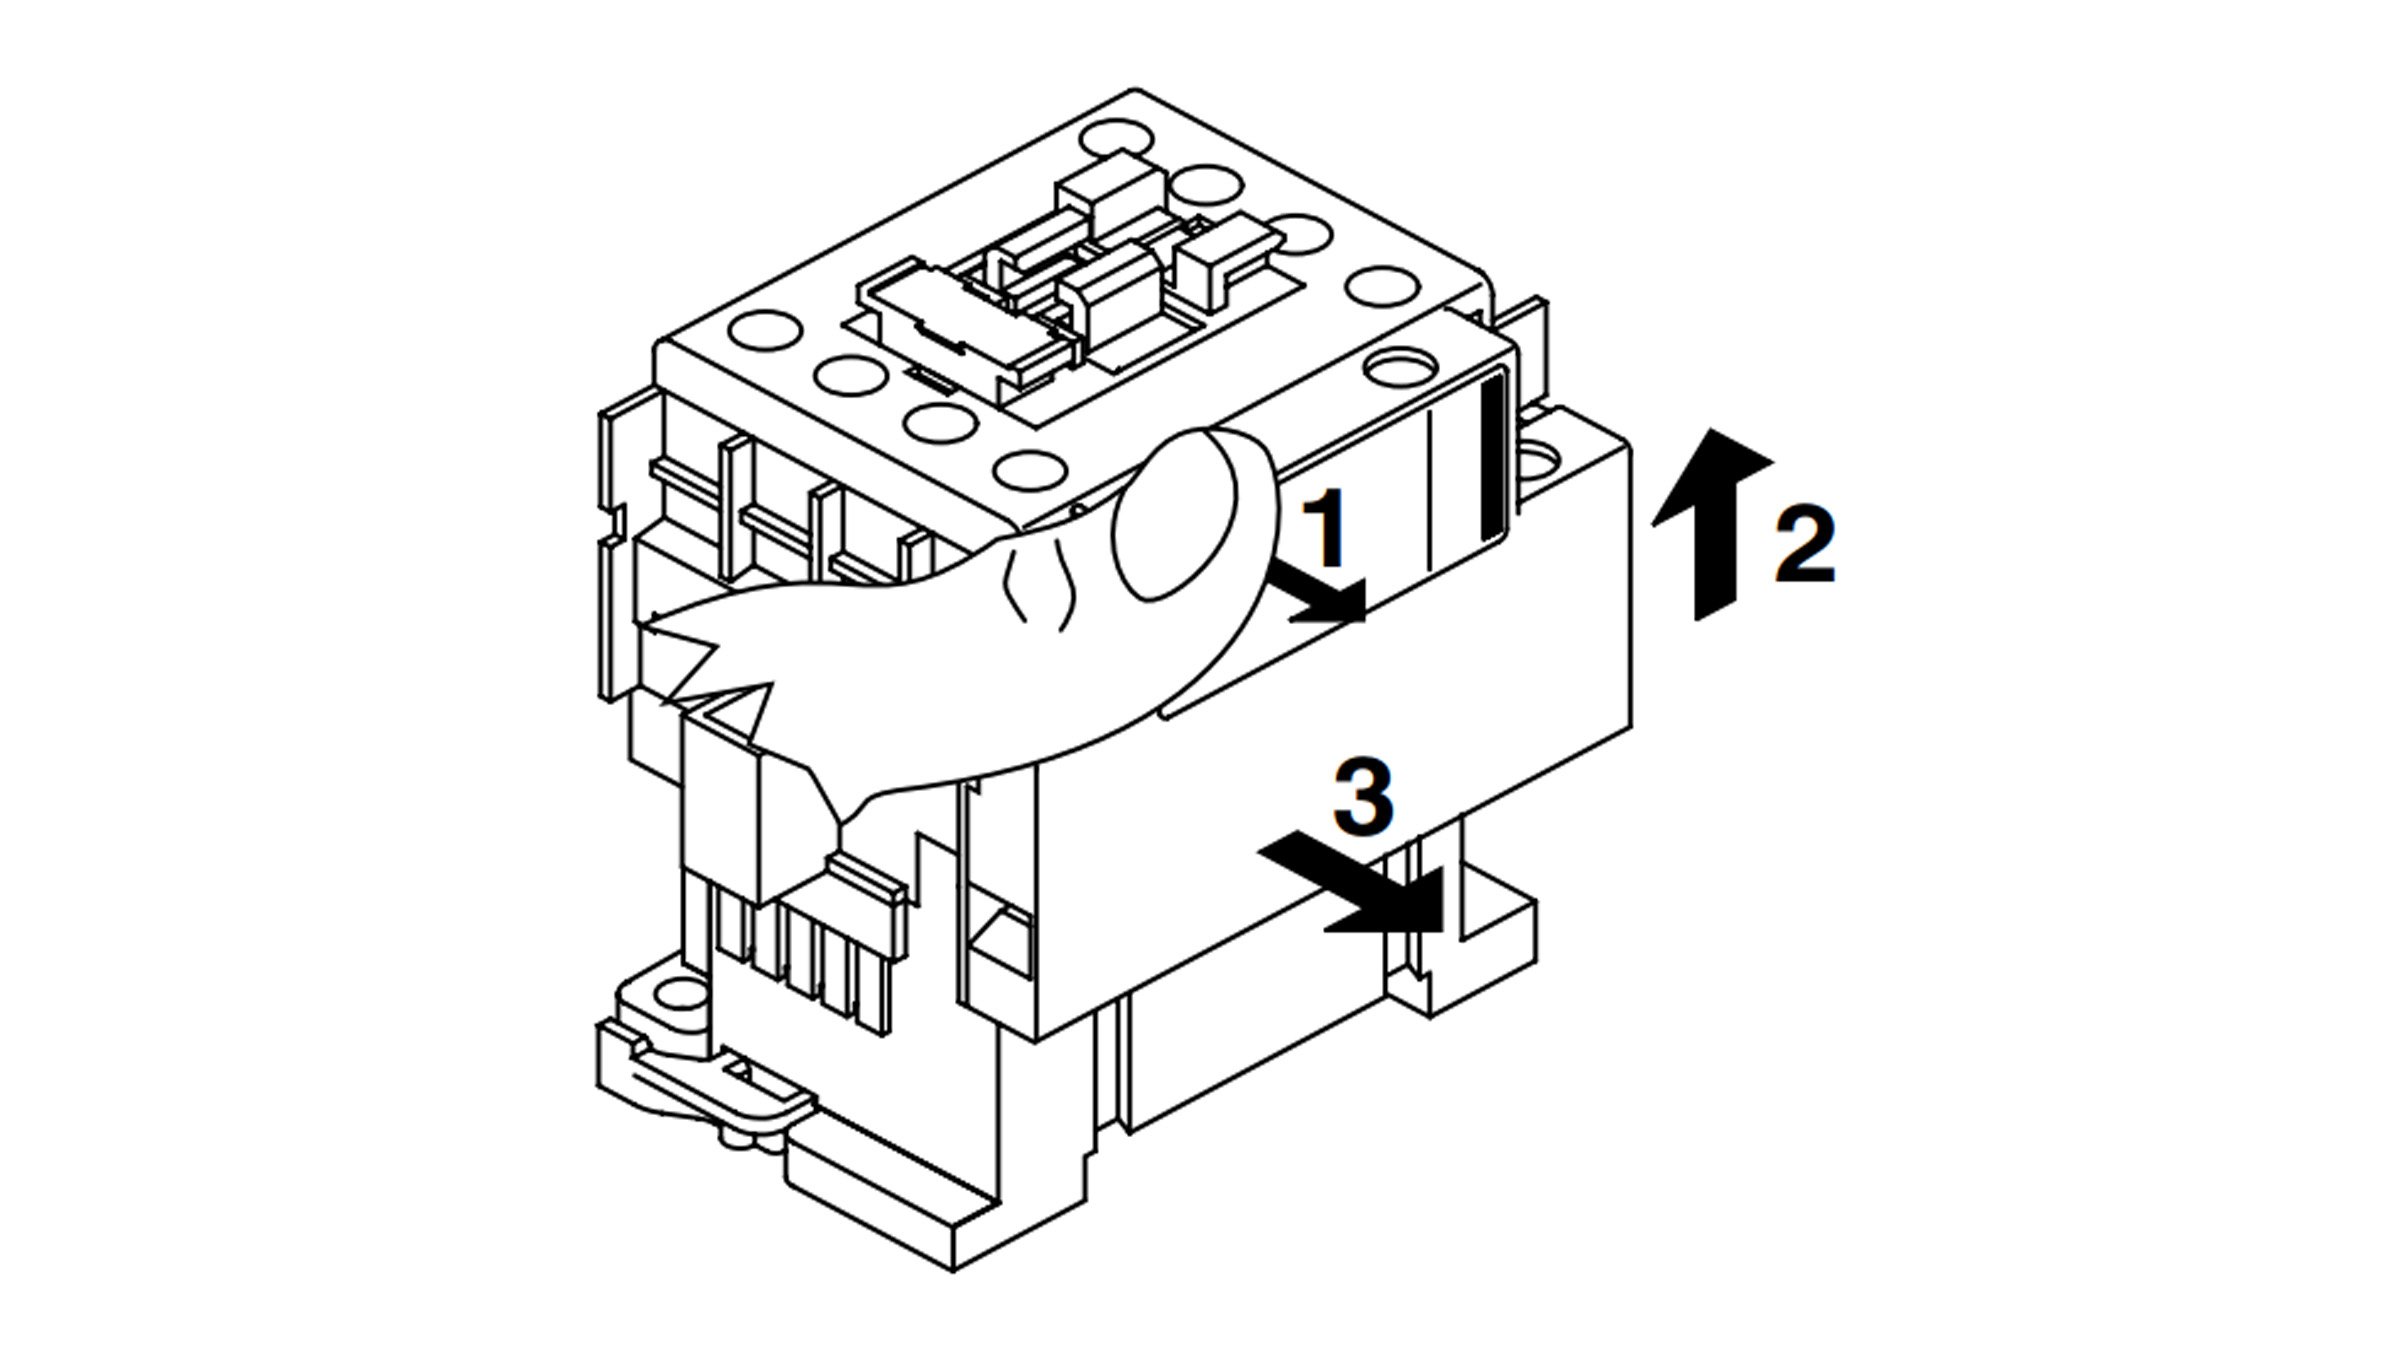 Sprecher & Schuh CA7 Auxiliary diagram showing 3 step removal 